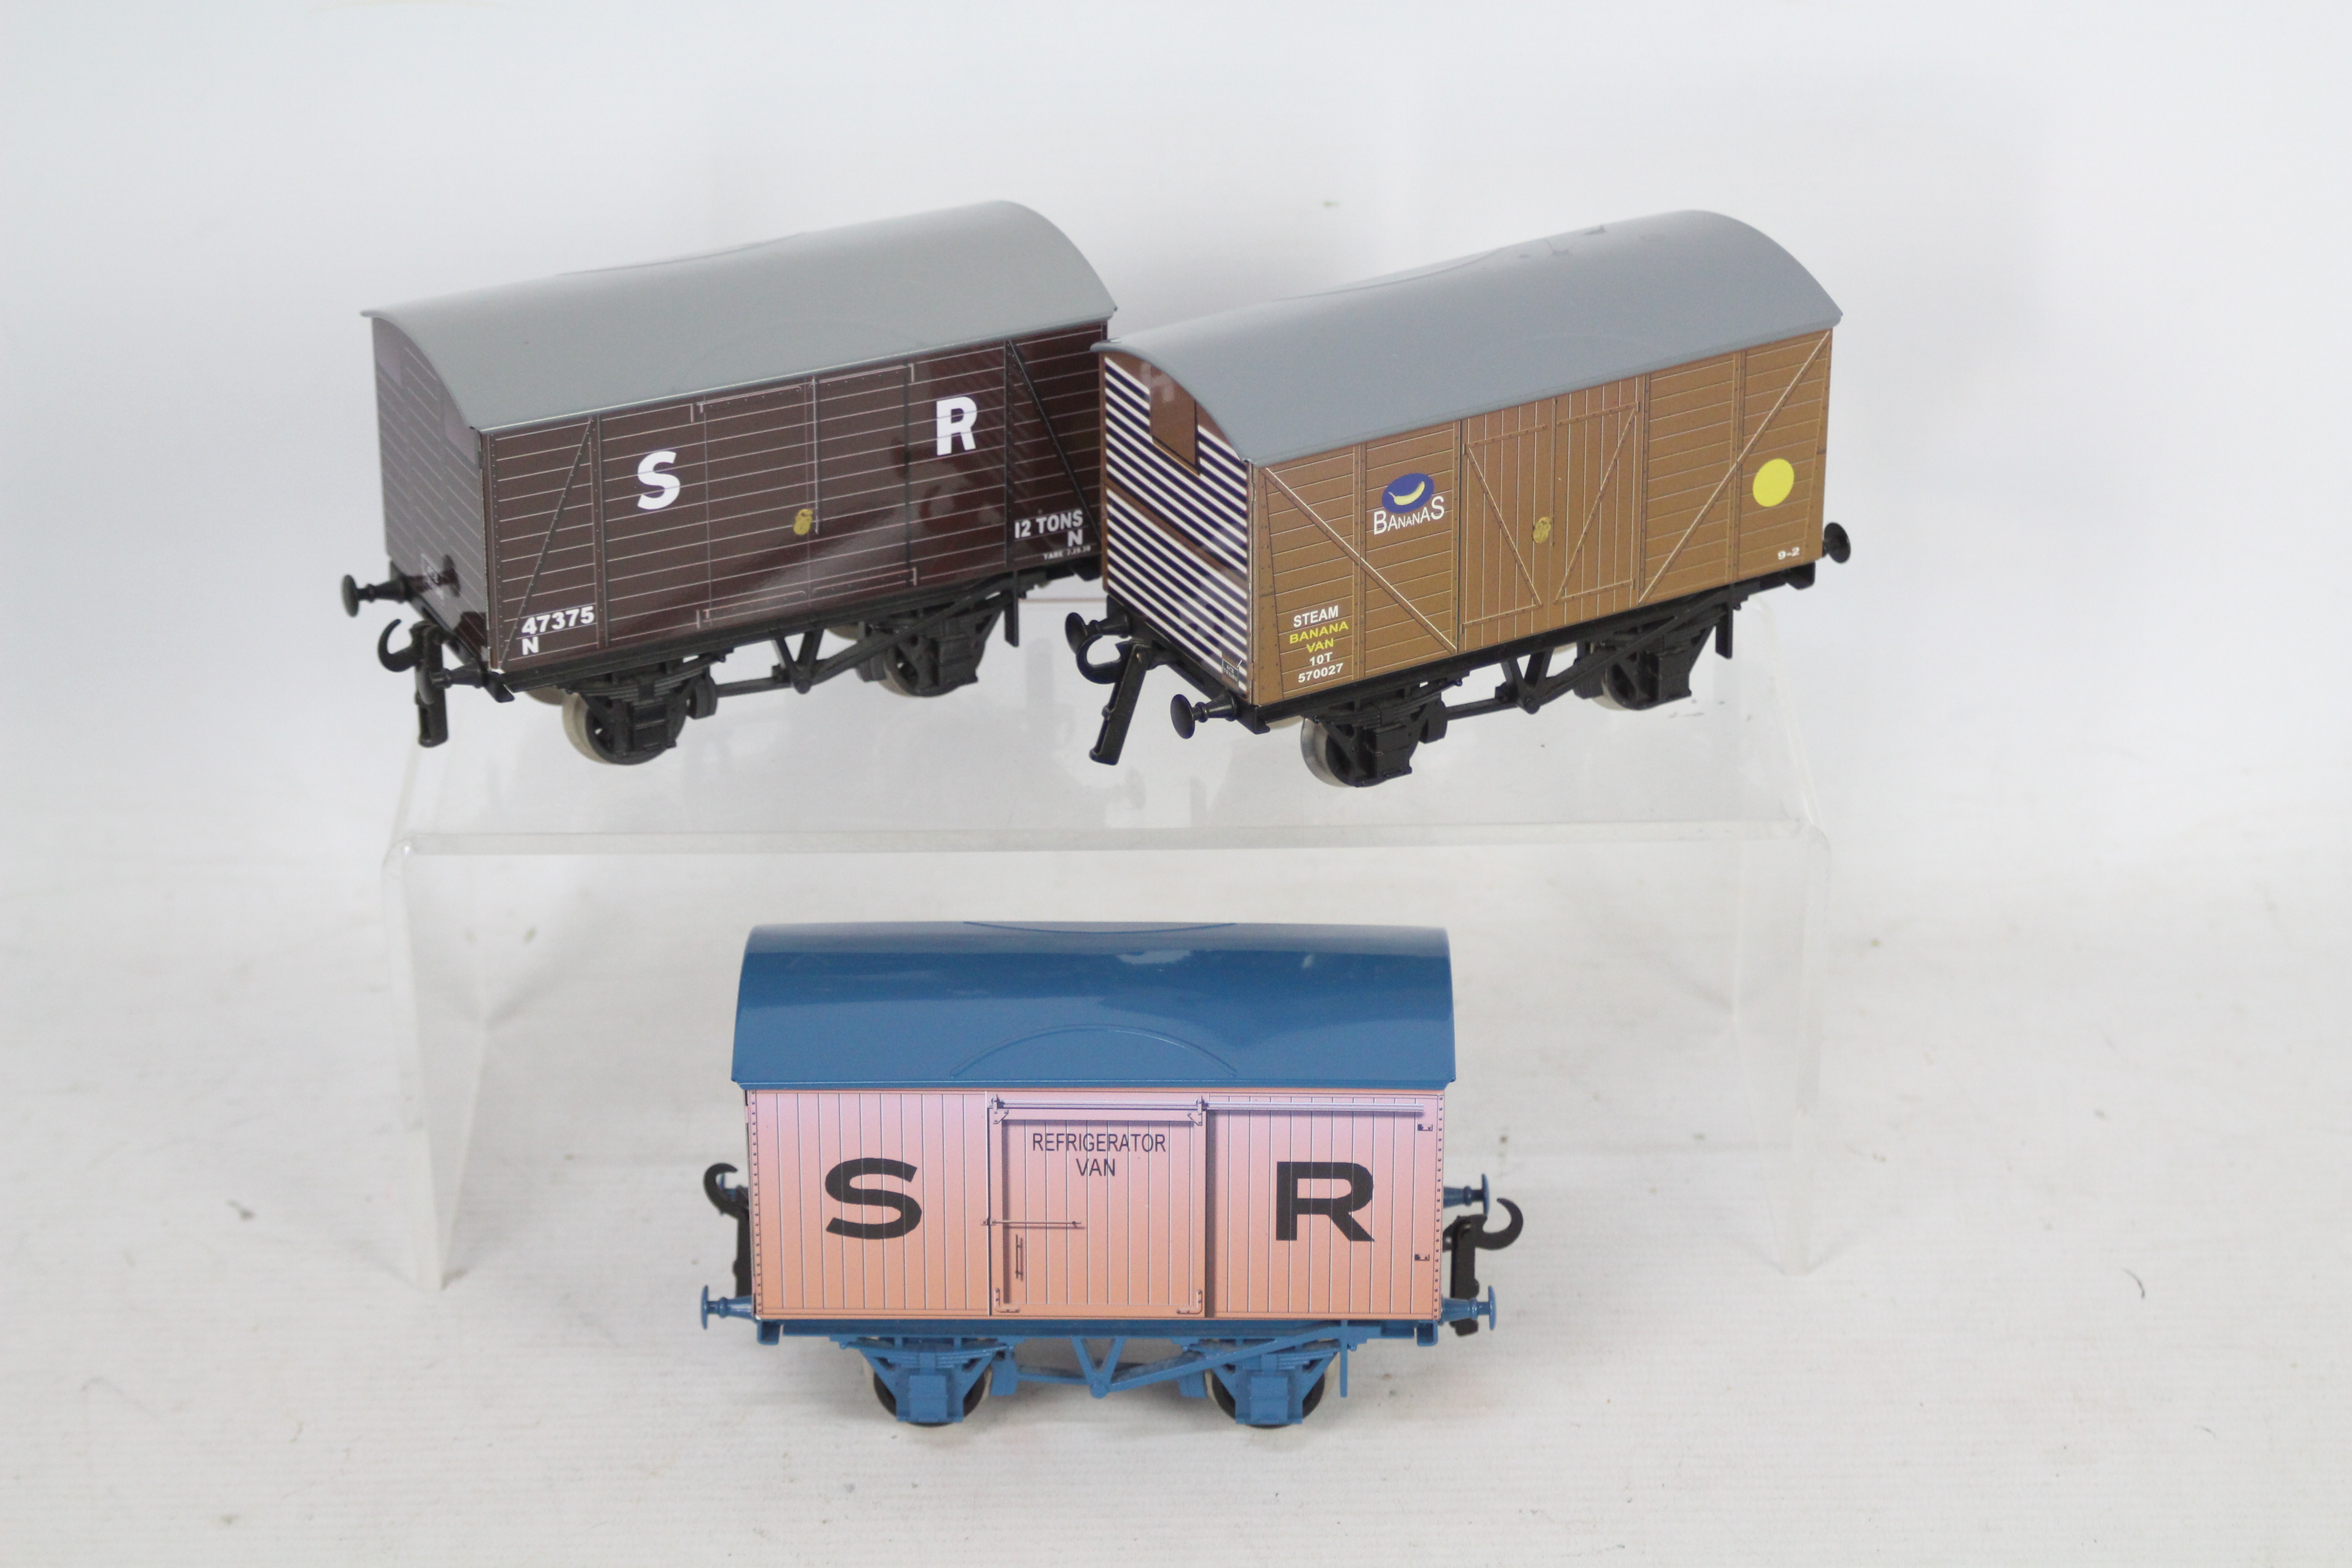 ACE Trains - Three unboxed ACE Trains O gauge tinplate wagons.